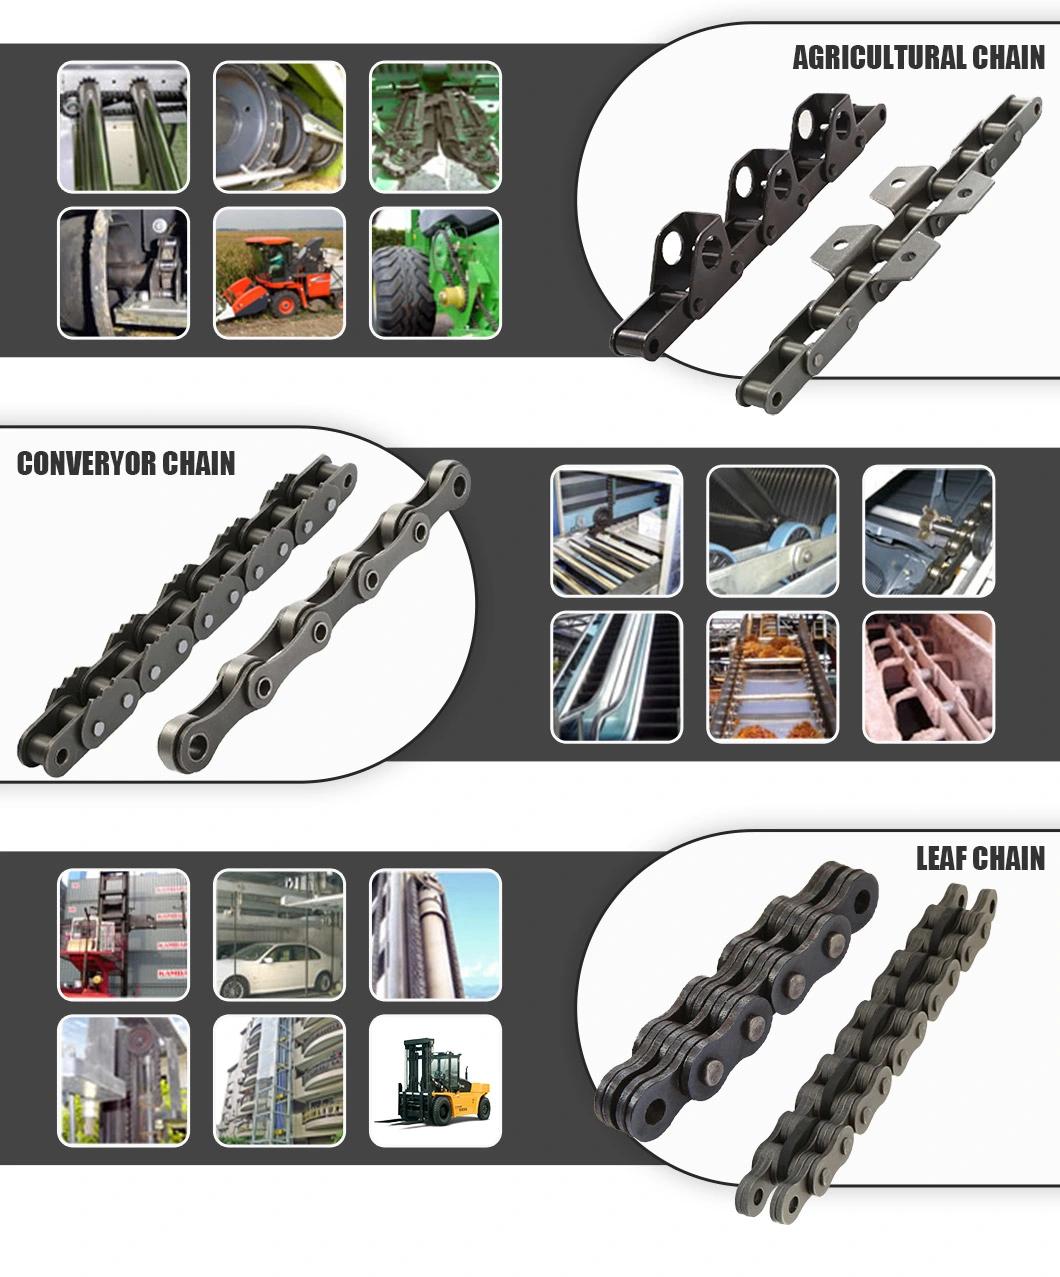 Made-to-Order 38.4VSD, 38.4rsd Transmission Agricultural Chain